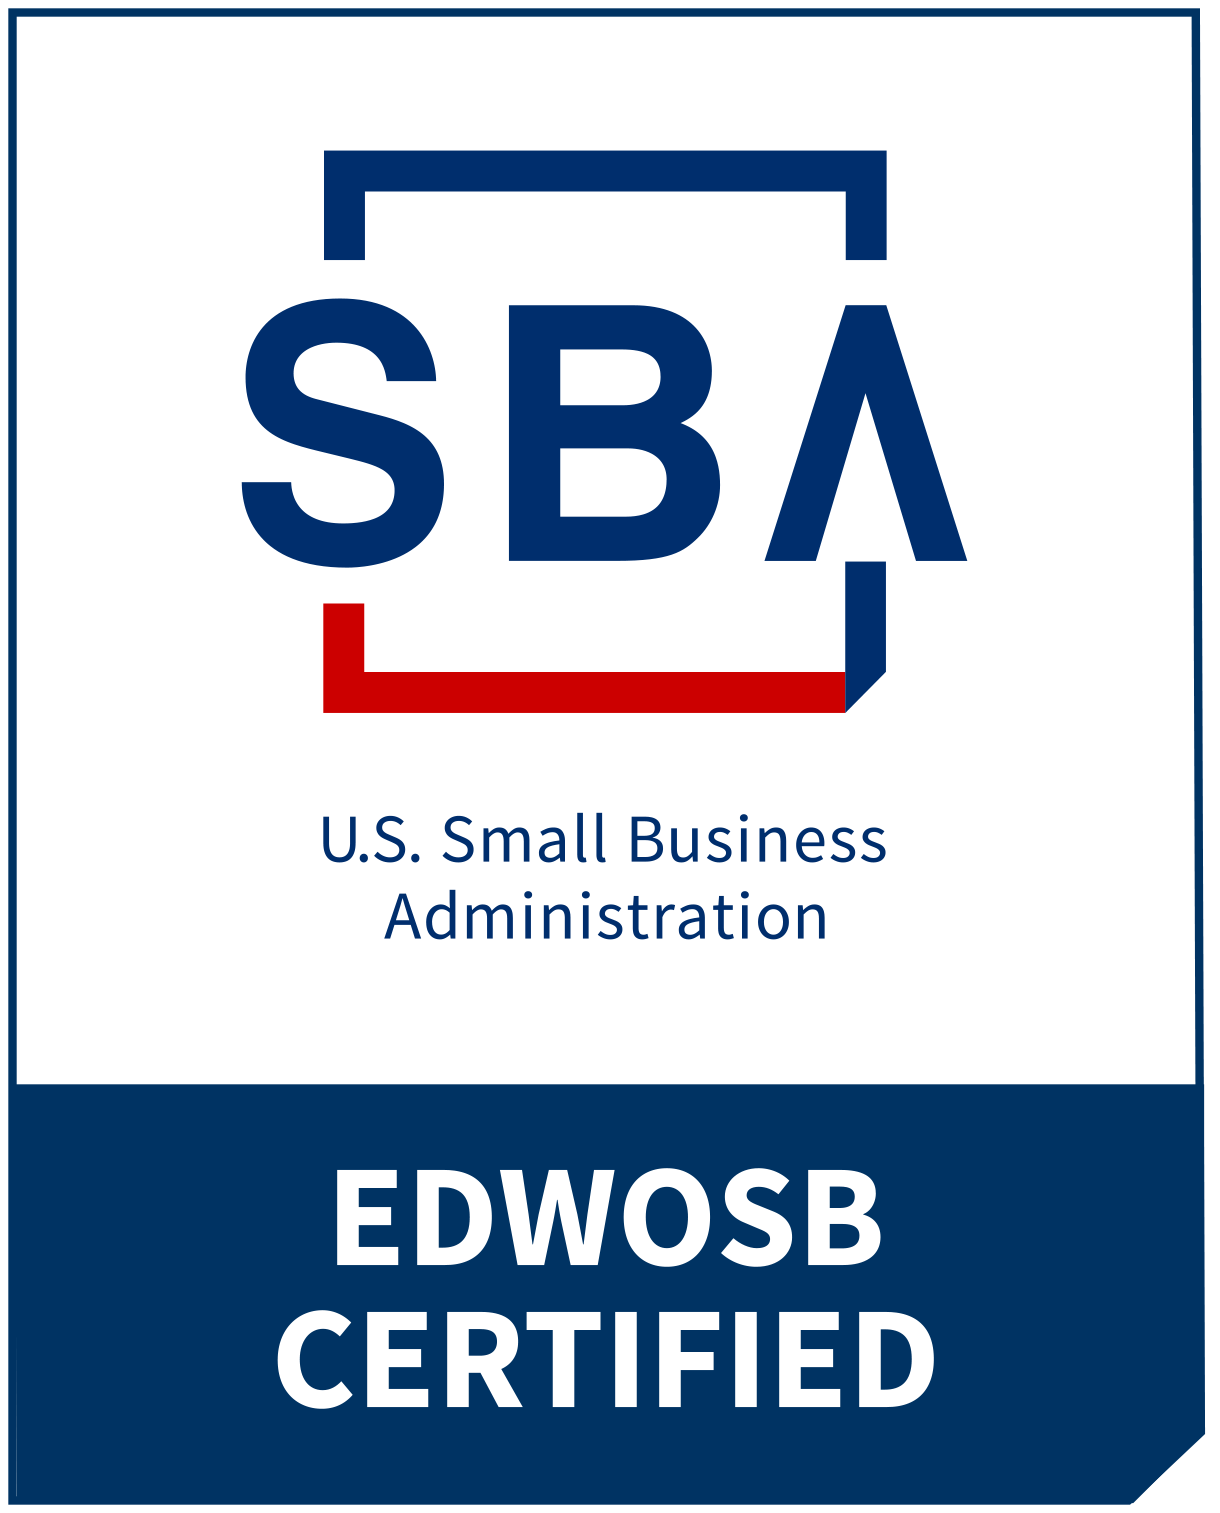 U.S. Small Business Administration EDWOSB certified logo